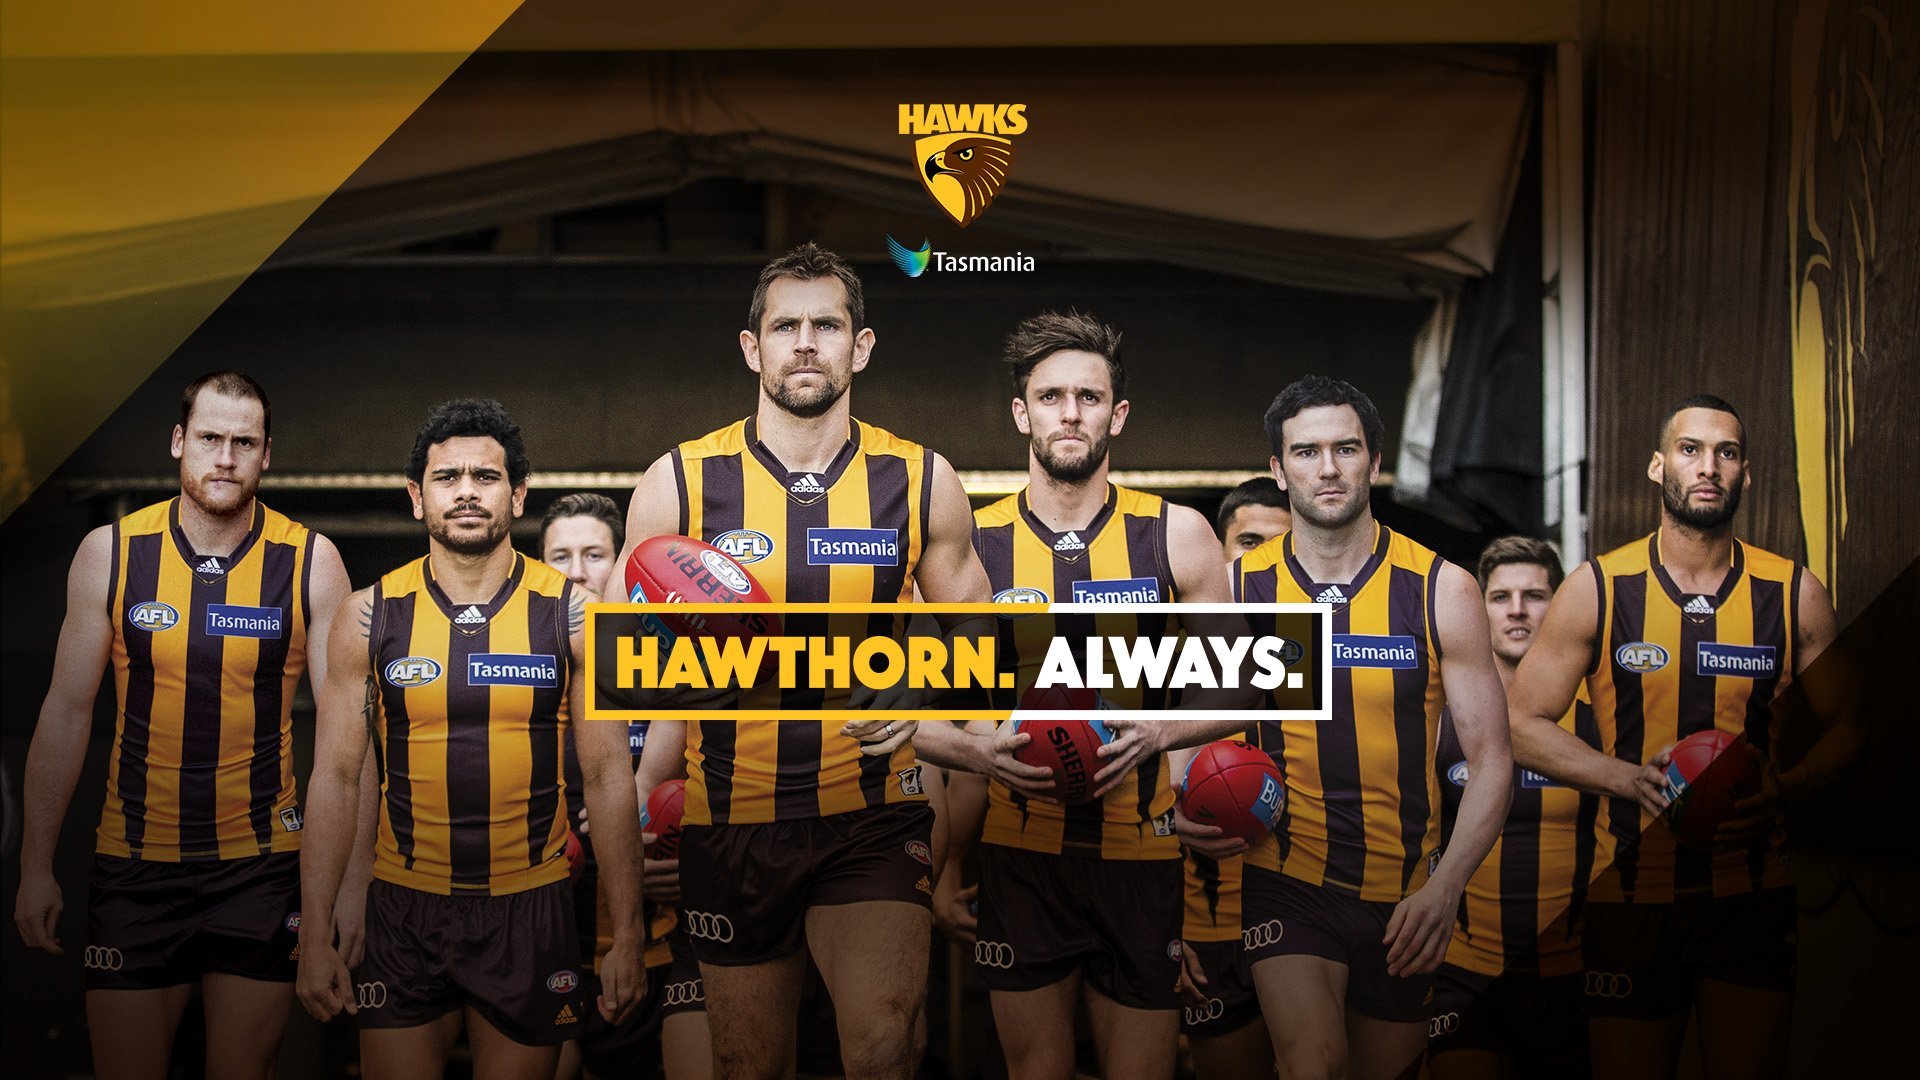 Hawthorn FC Hawks wallpaper are now available for your phone, tablet and computer! Get them here